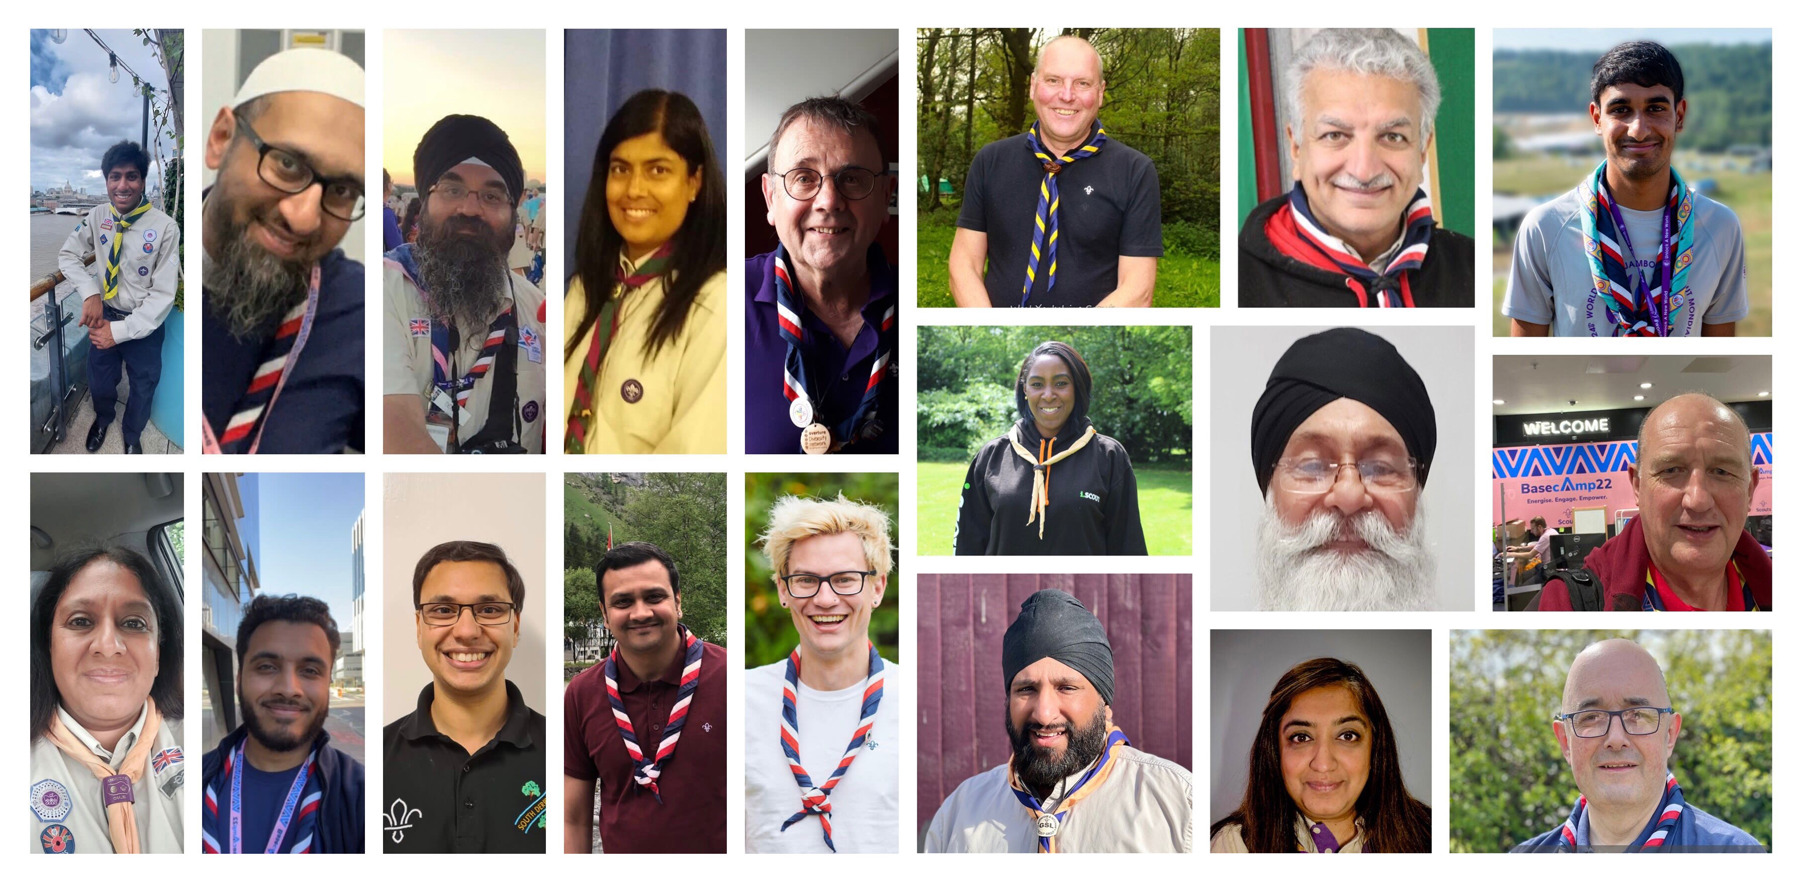 A group of smiling Scouts volunteers from different backgrounds who make up the Community of Practice